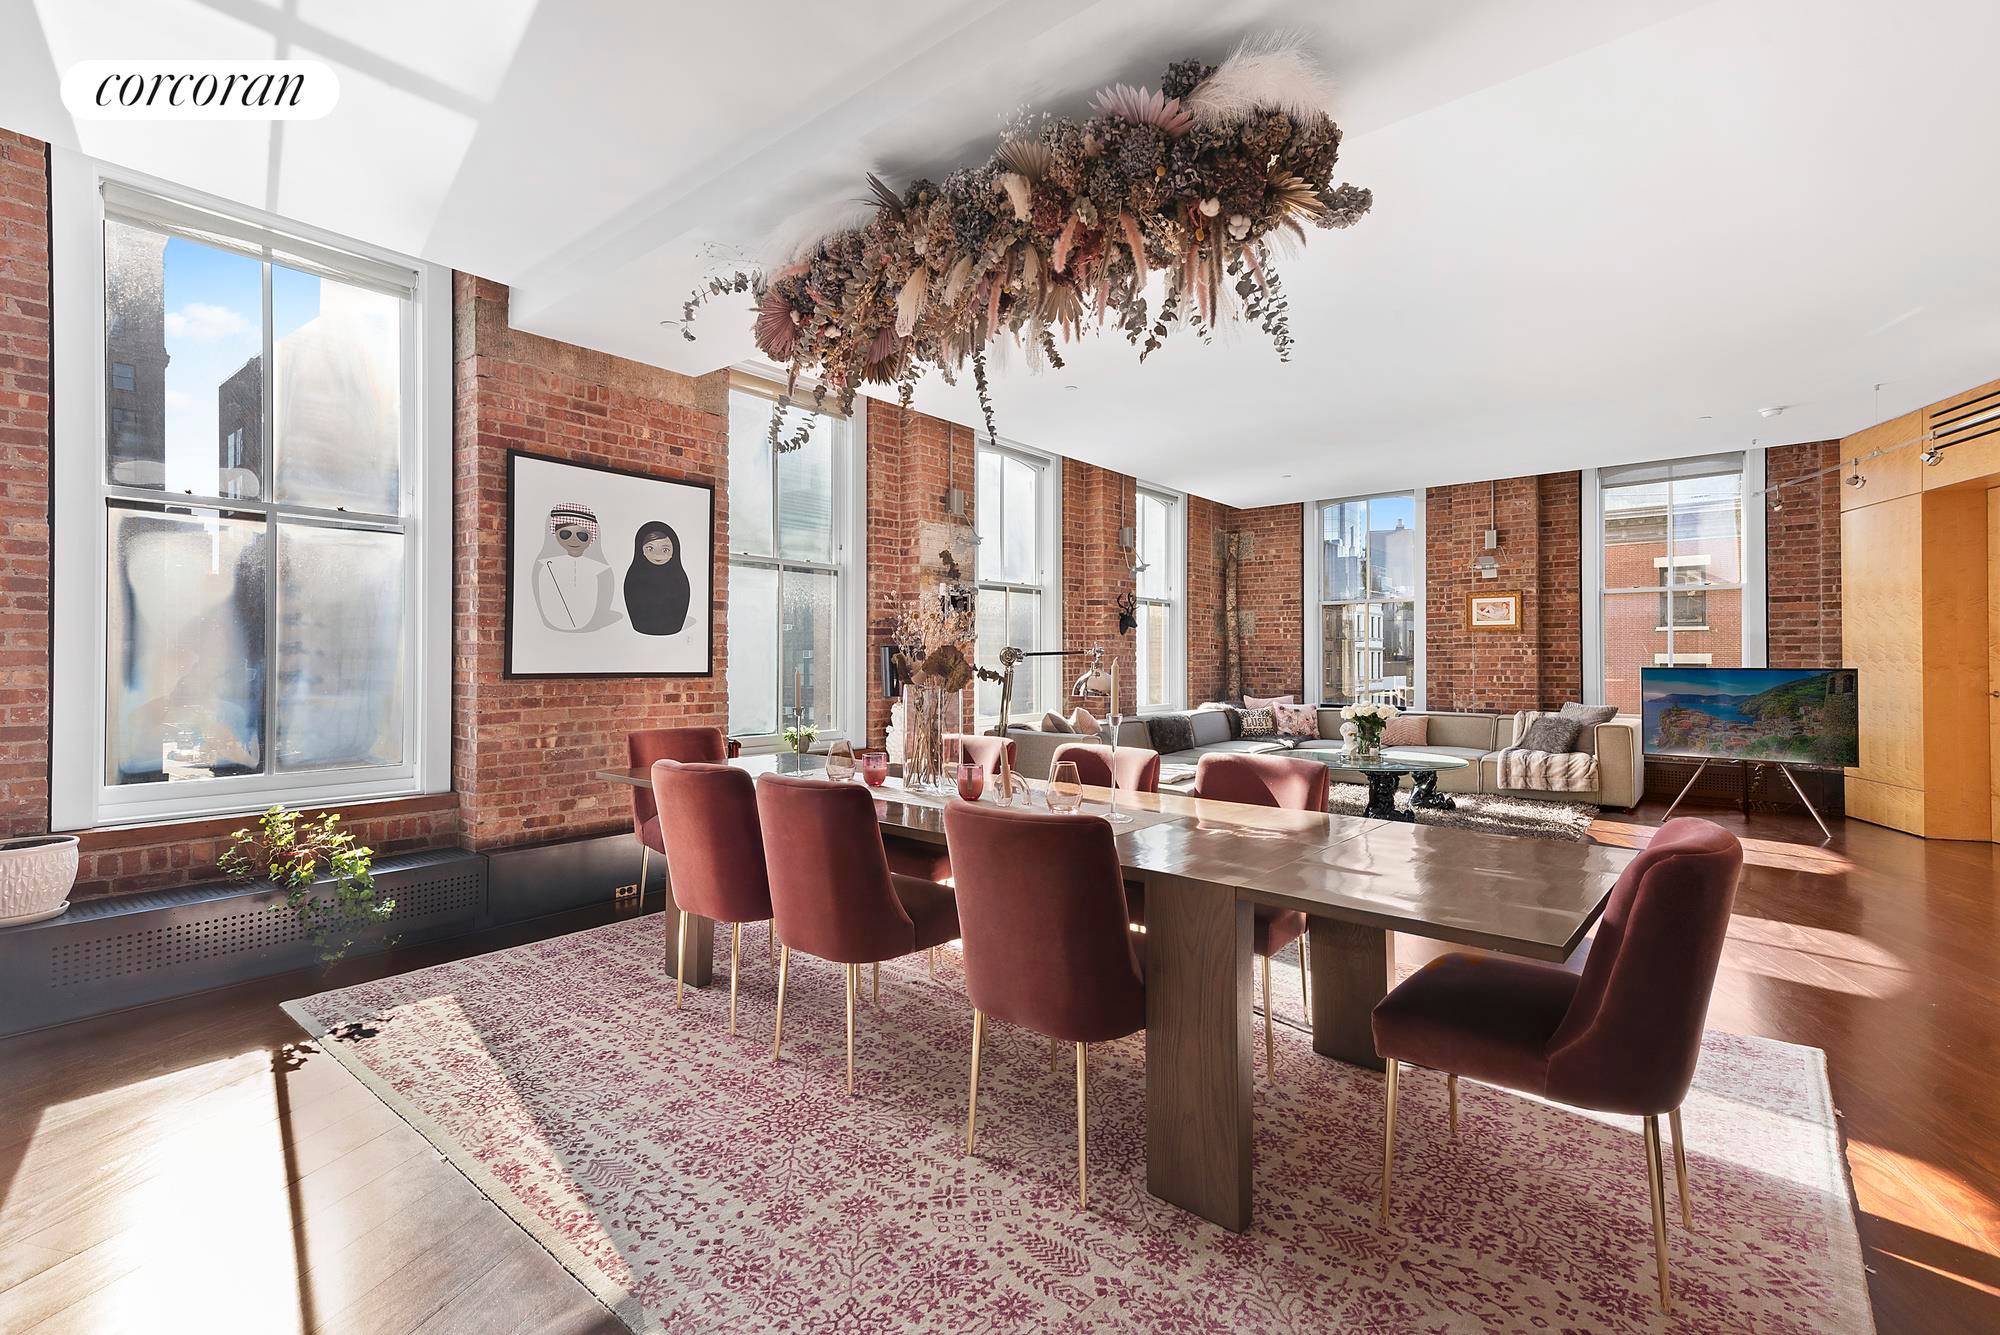 This full floor vintage Tribeca loft welcomes exceptional living and entertaining with its grand proportions and well planned five bedroom, four bathroom layout in one of Tribeca's best boutique condominiums.